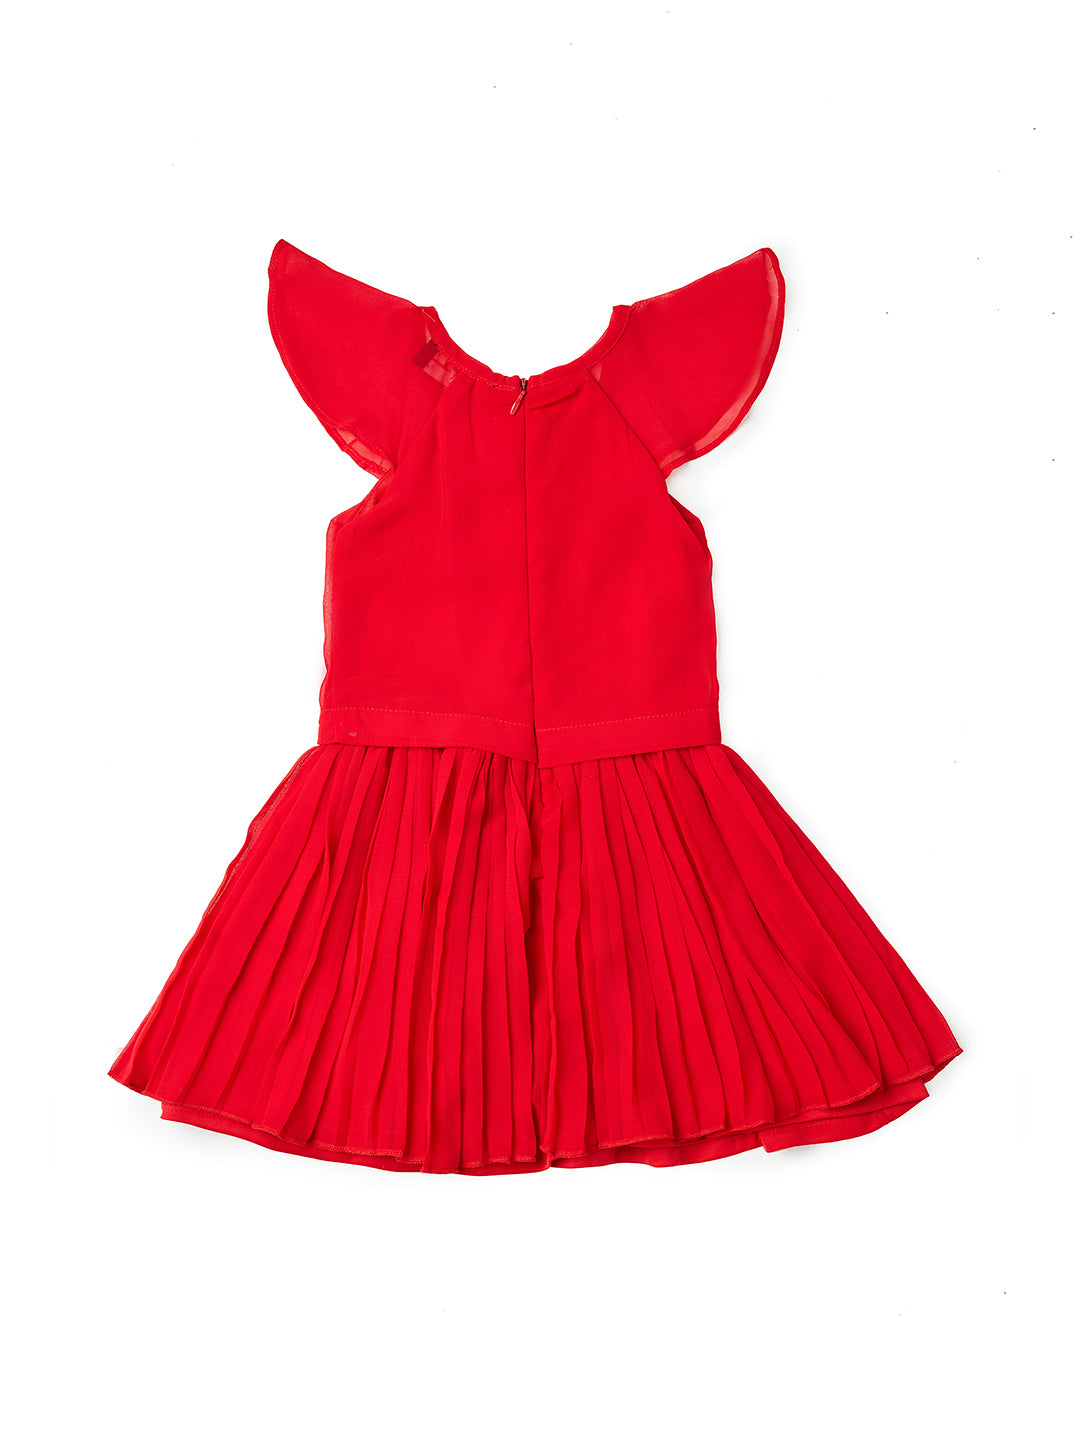 Nuberry Girl Frock Dress - Red with Cap Sleeve